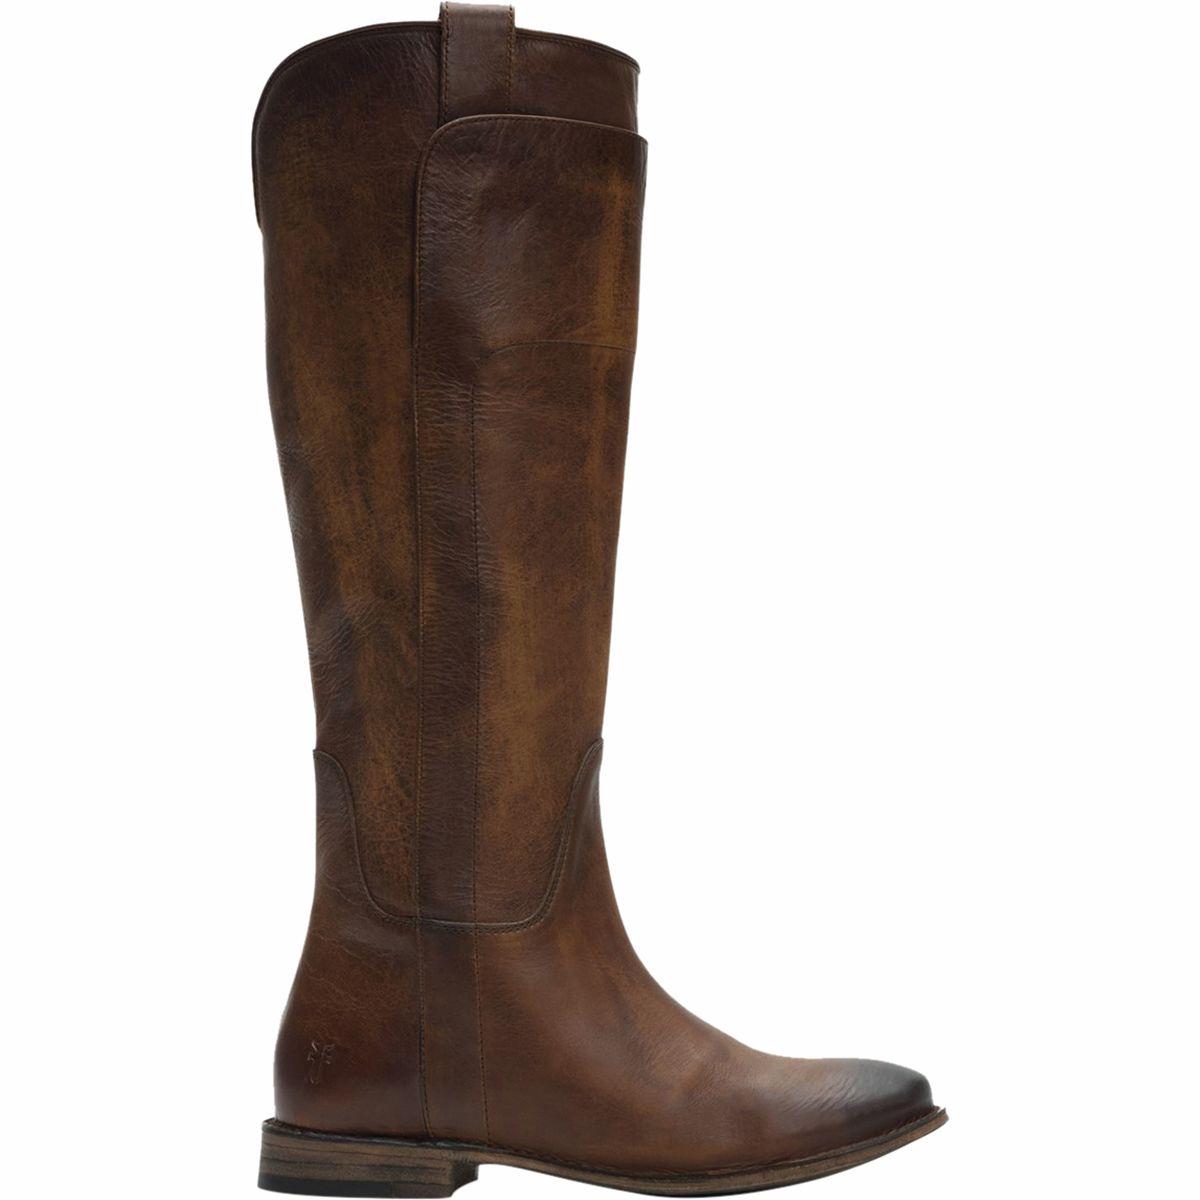 Frye Leather Paige Tall Riding Boot in Dark Brown (Brown) - Lyst